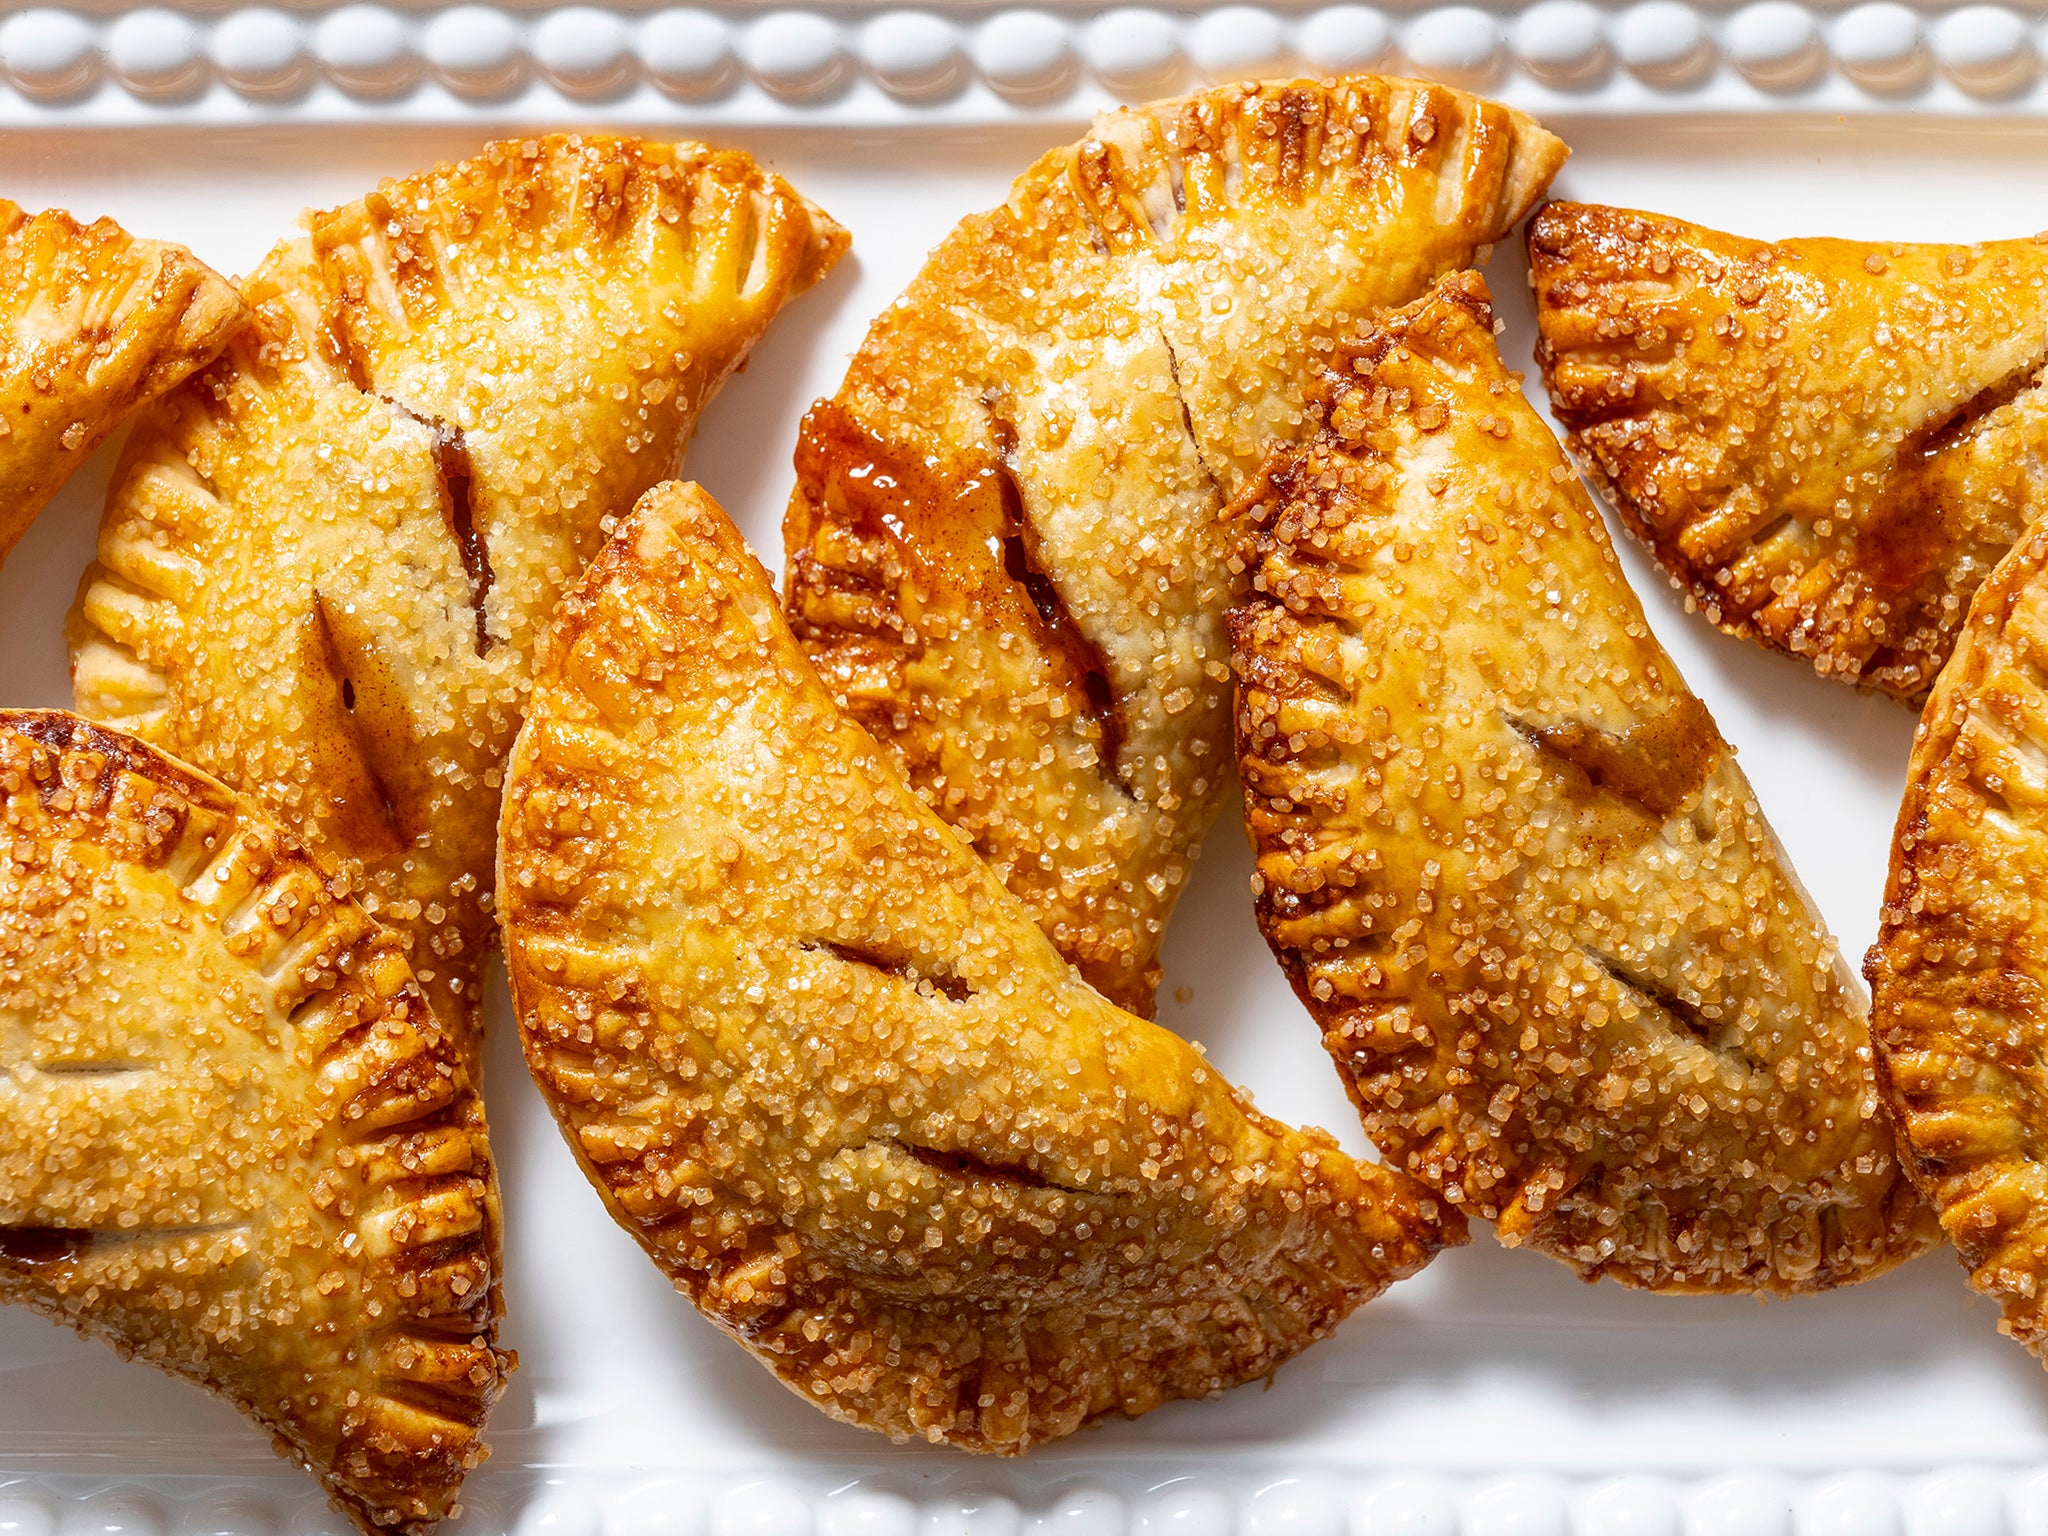 An air fryer and shop-bought pie dough make these parcels so easy to make at home